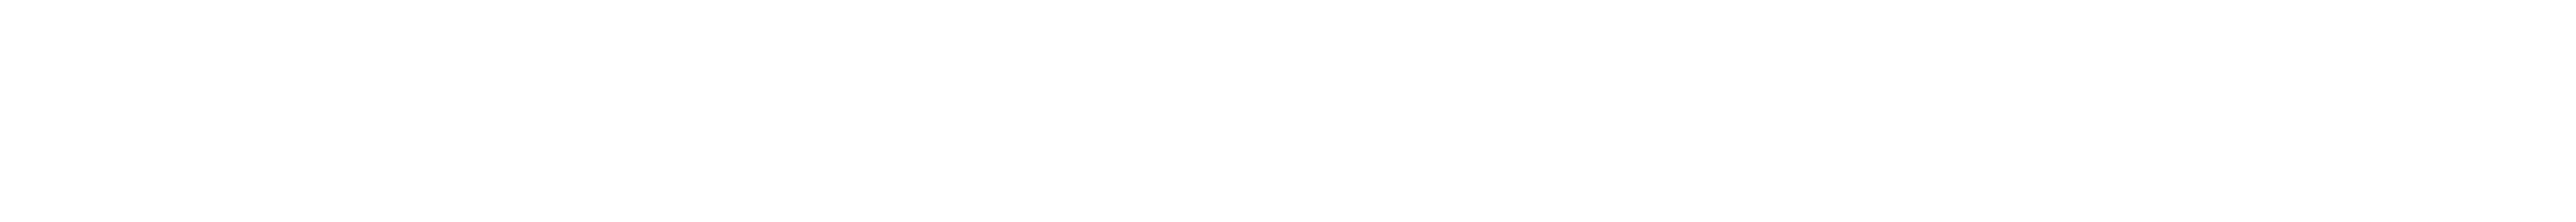 Here's how we're commited to making a positive impact. Responsible Fabrics. Responsible Production. Responsible Use. Responsible in Action.